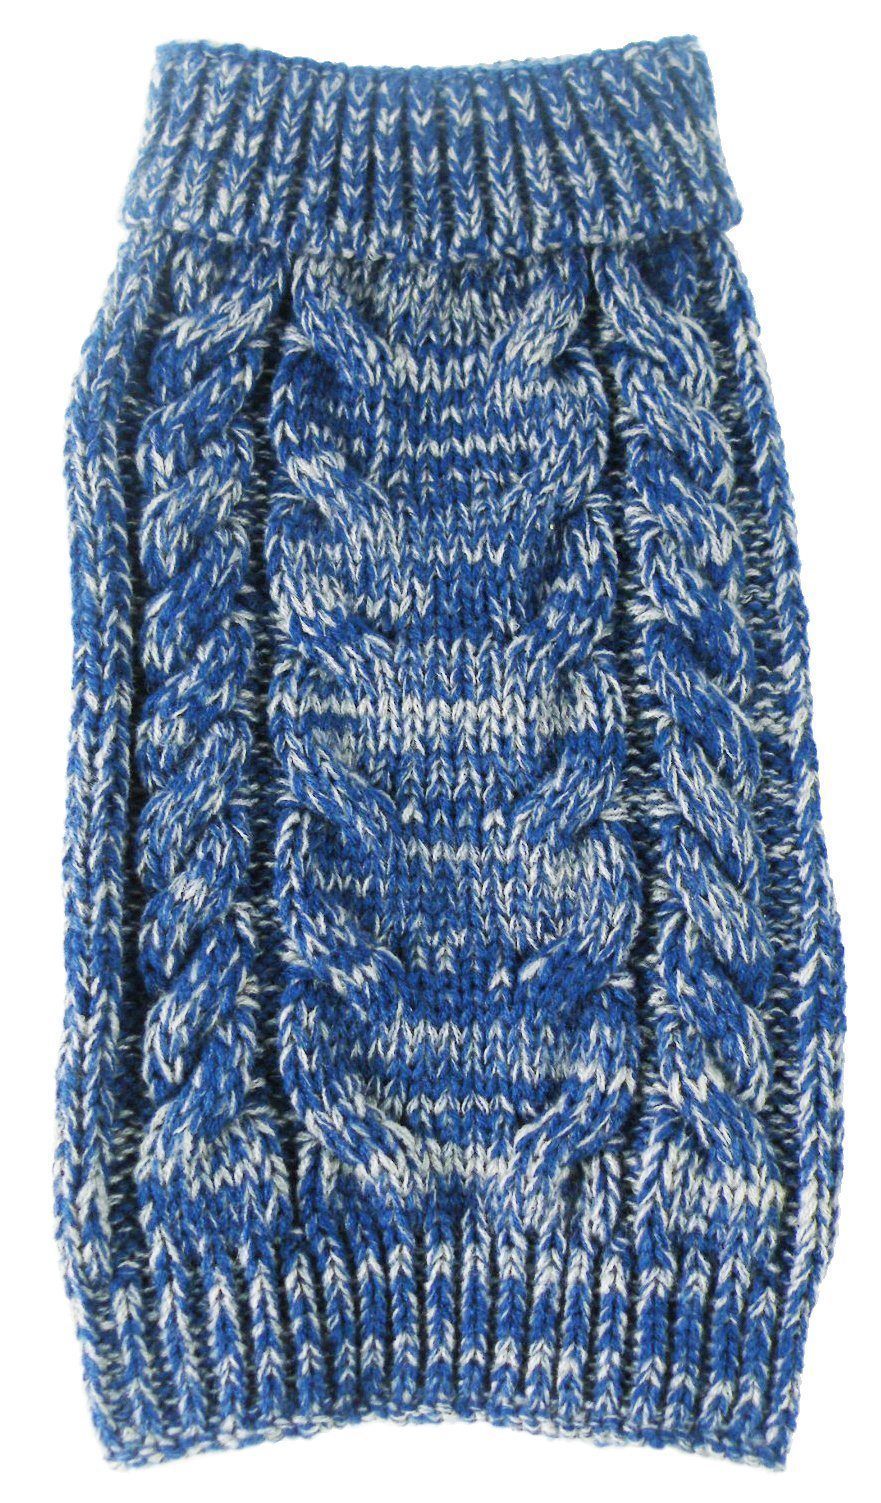 Pet Life ® Classical 'True Blue' Heavy Cable Knitted Ribbed Fashion Dog Sweater  